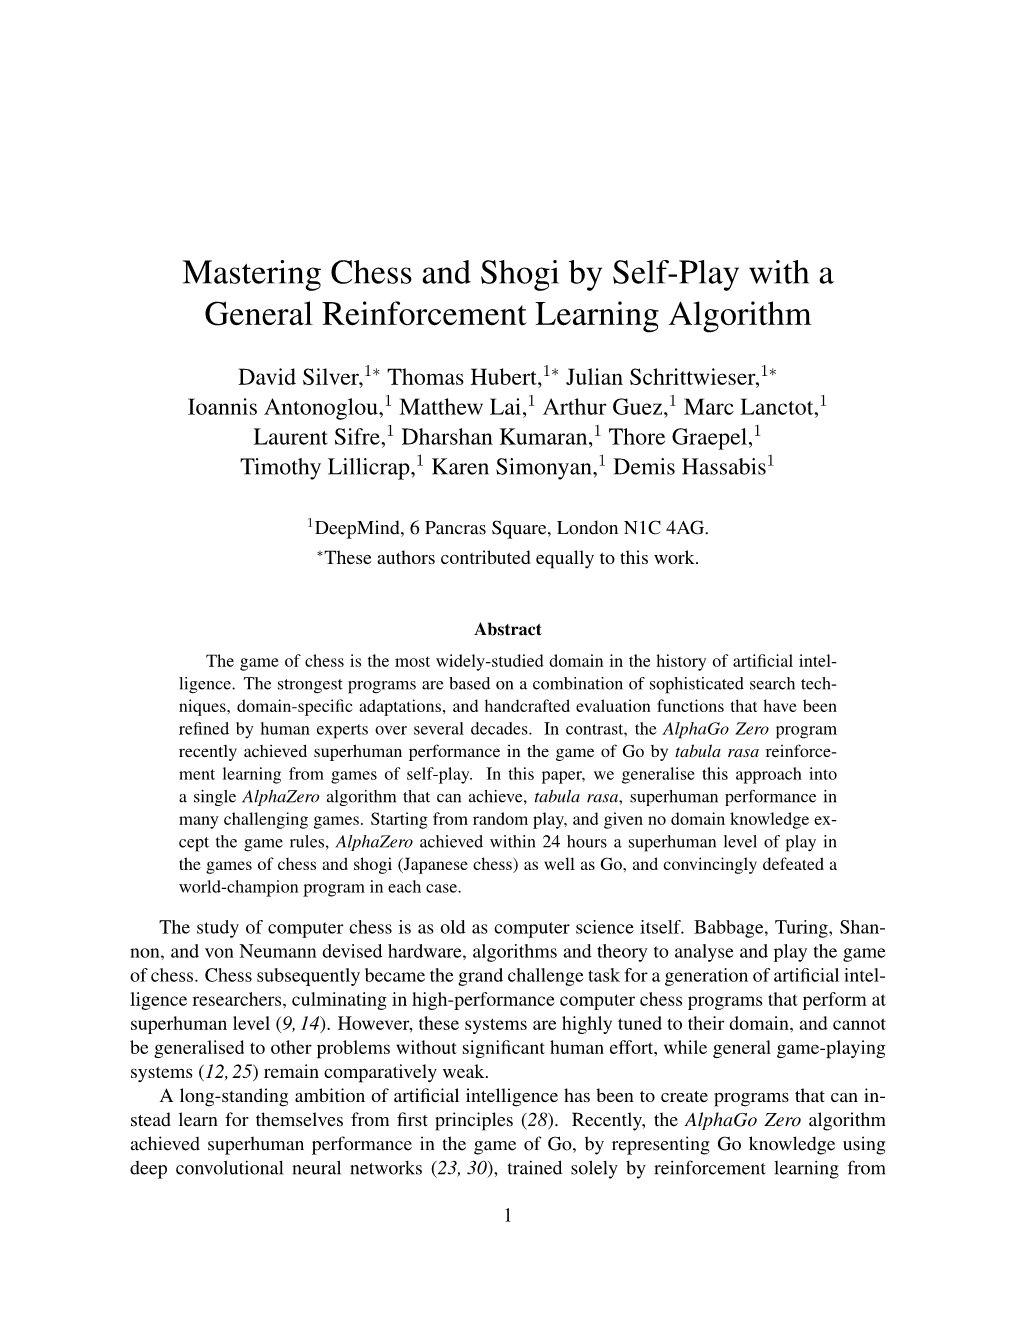 Mastering Chess and Shogi by Self-Play with a General Reinforcement Learning Algorithm